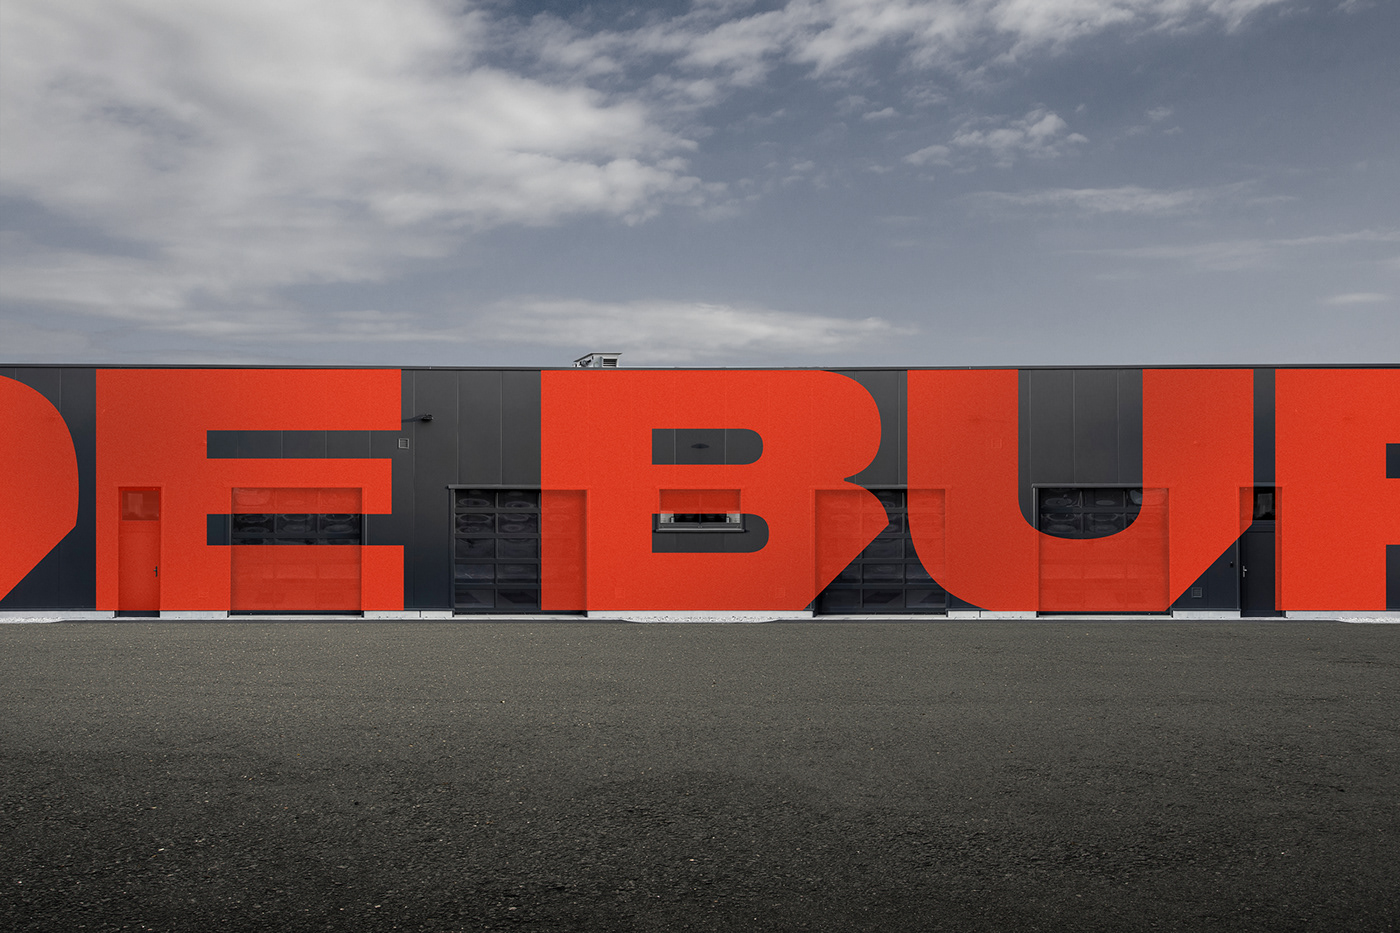 Large scale logo on building for De Buf.